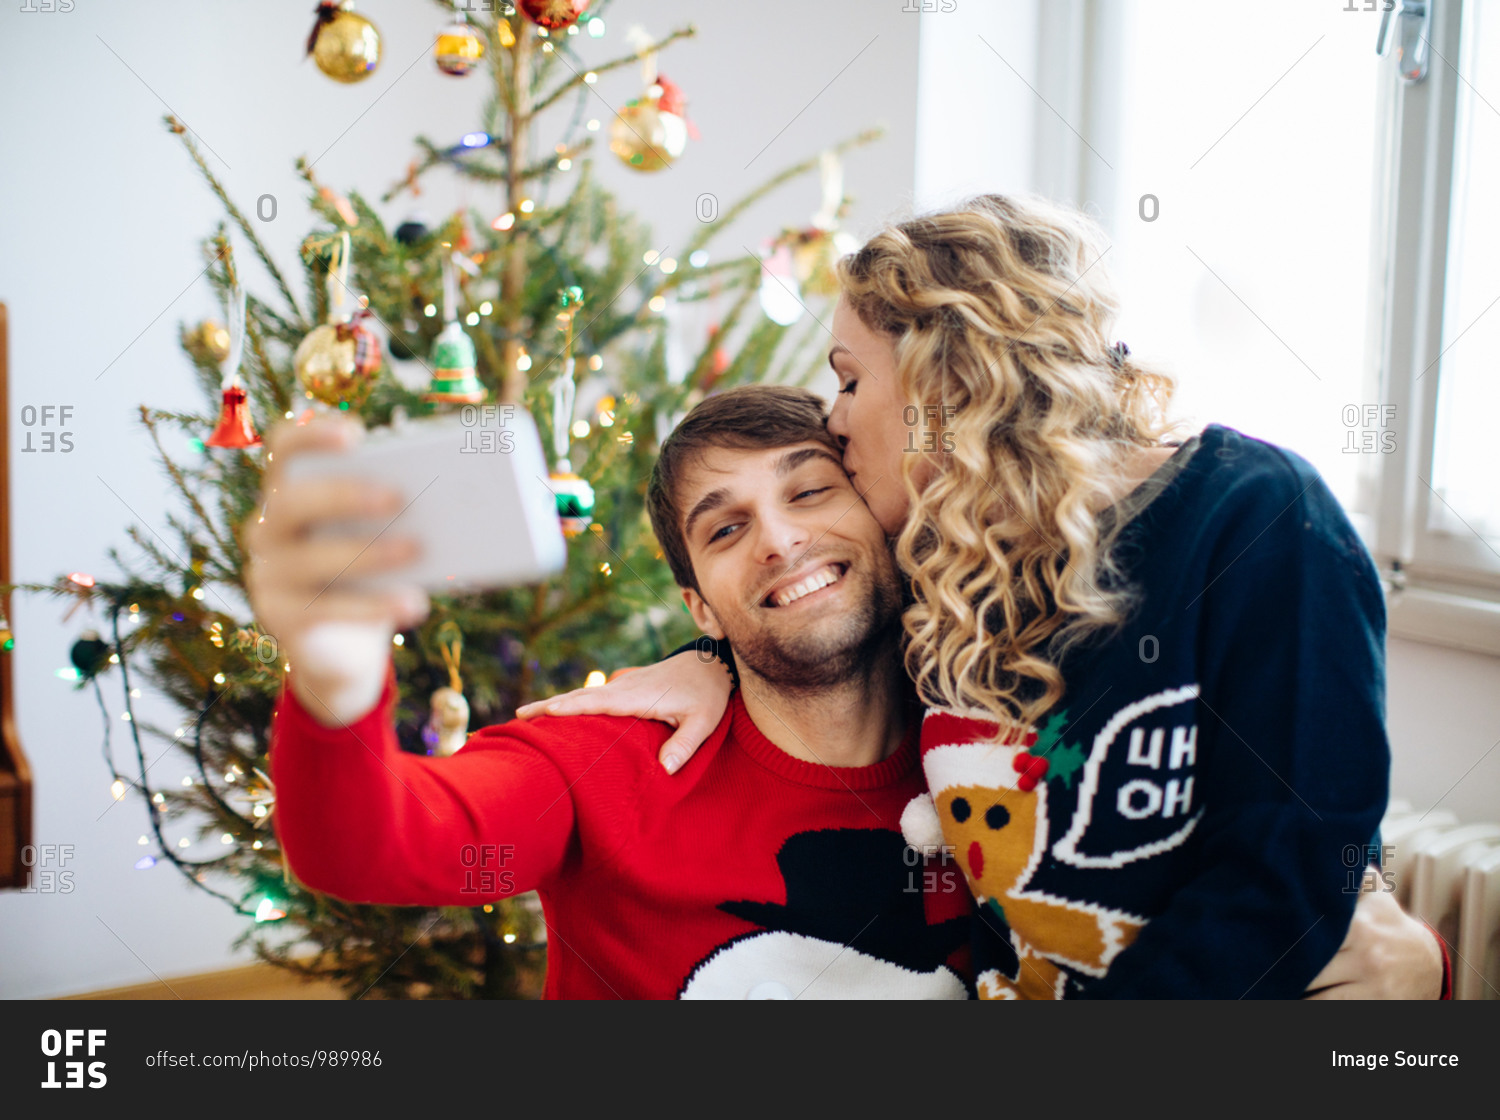 Couple taking selfie in front of Christmas tree at home